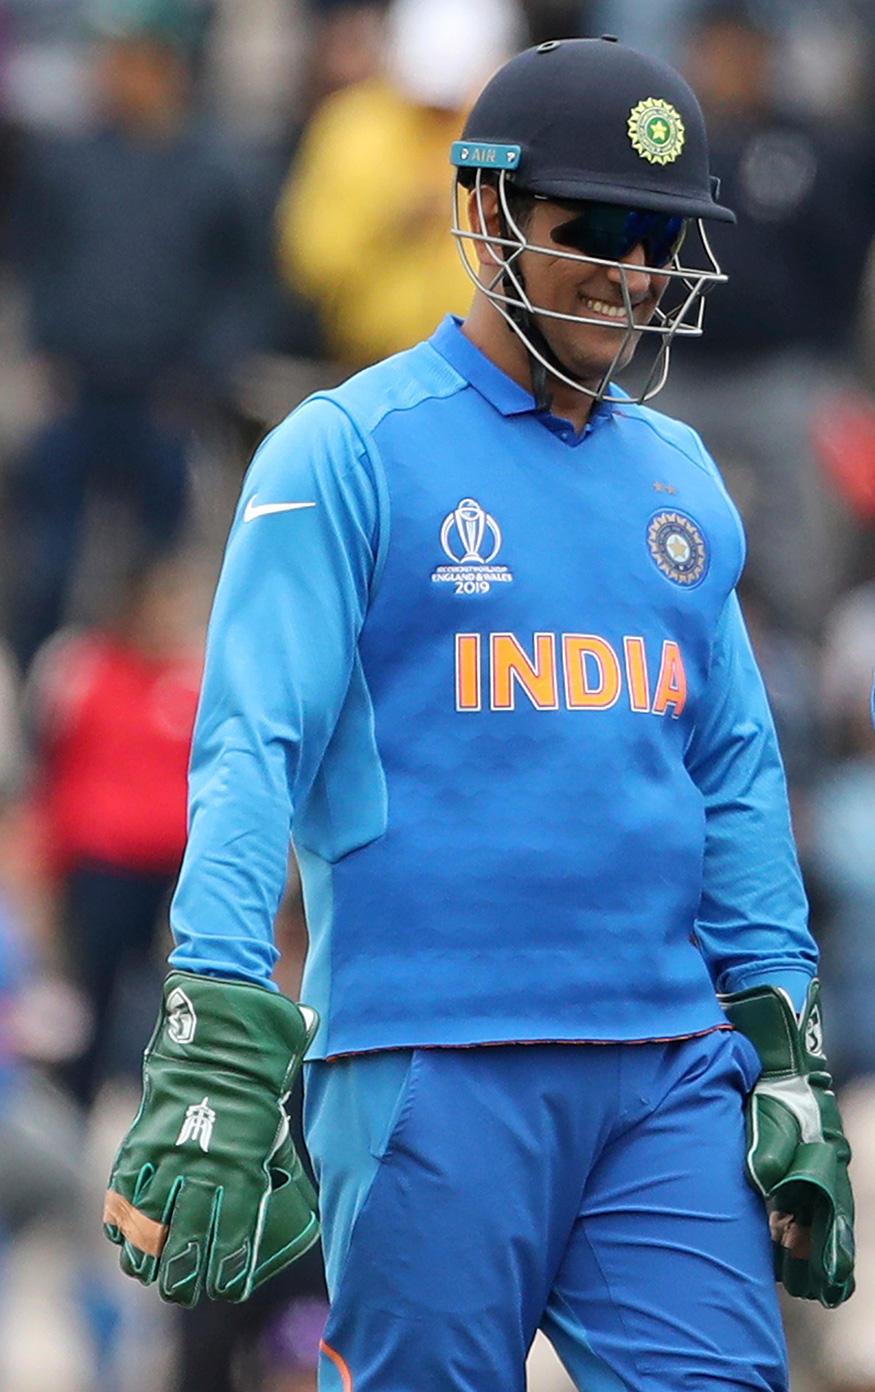 Ms Dhoni Smiles After The Dismissal Of A South African - Ms Dhoni Helmet Smiling - HD Wallpaper 